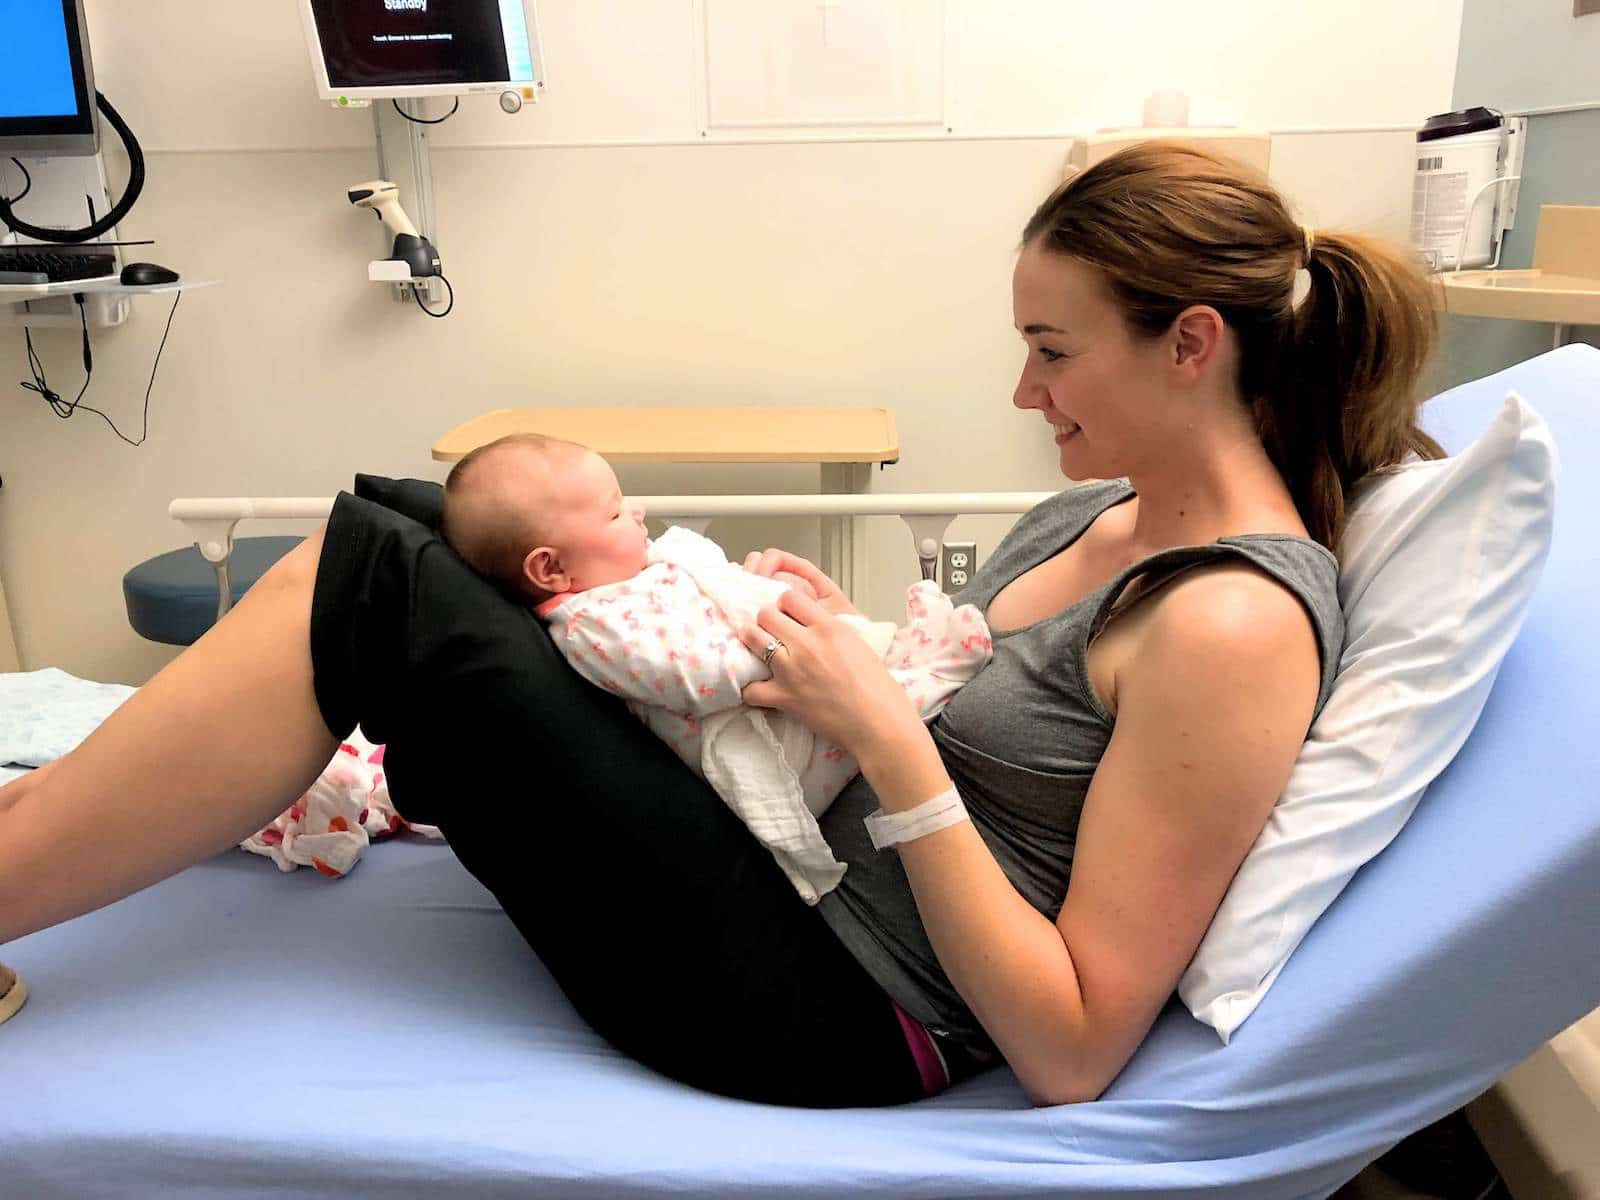 Woman holds baby on hospital bed in medical facility.